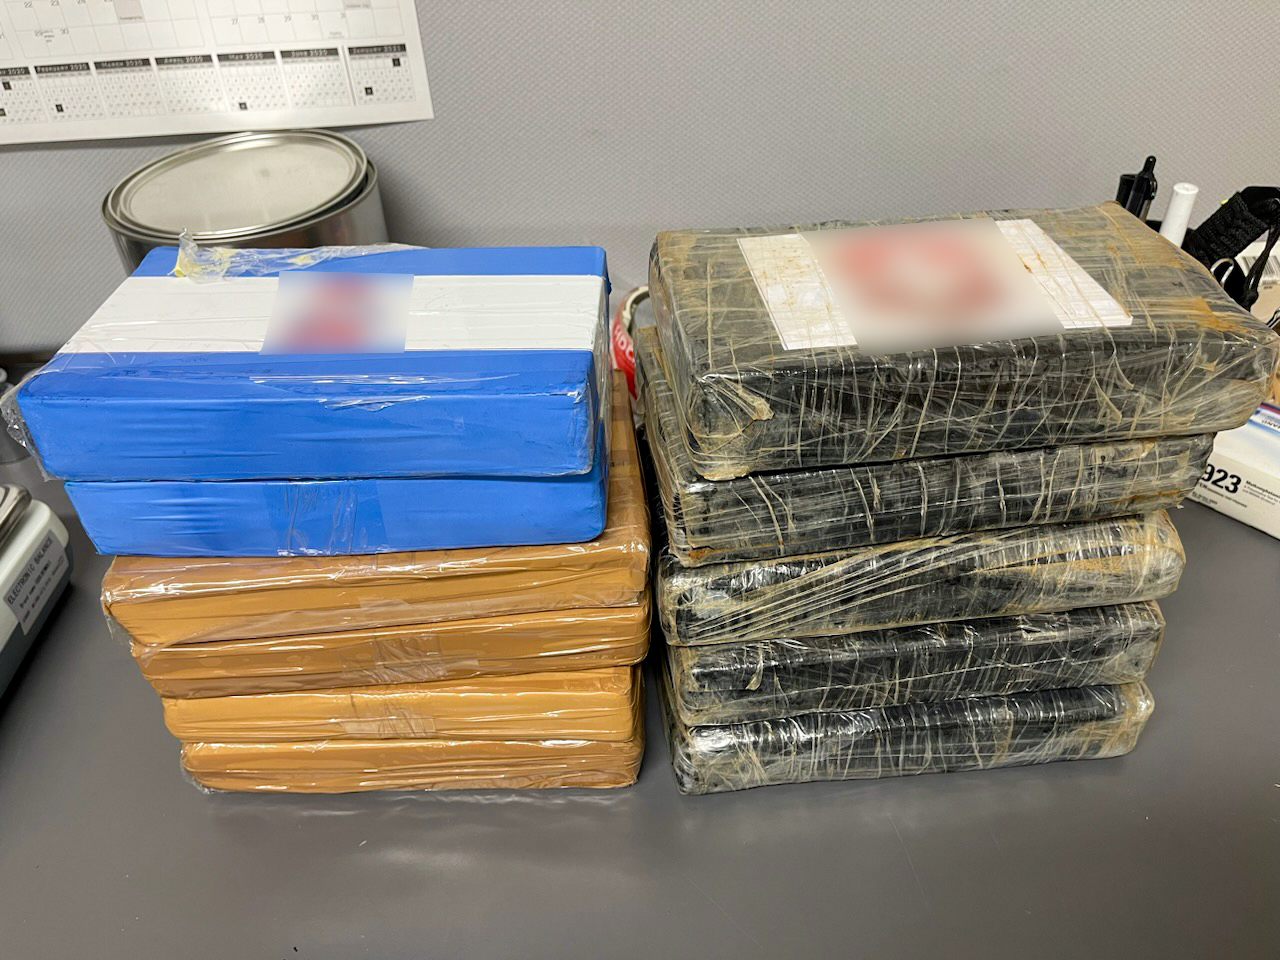 14.25 pounds of fentanyl powder and 12.55 pounds of cocaine